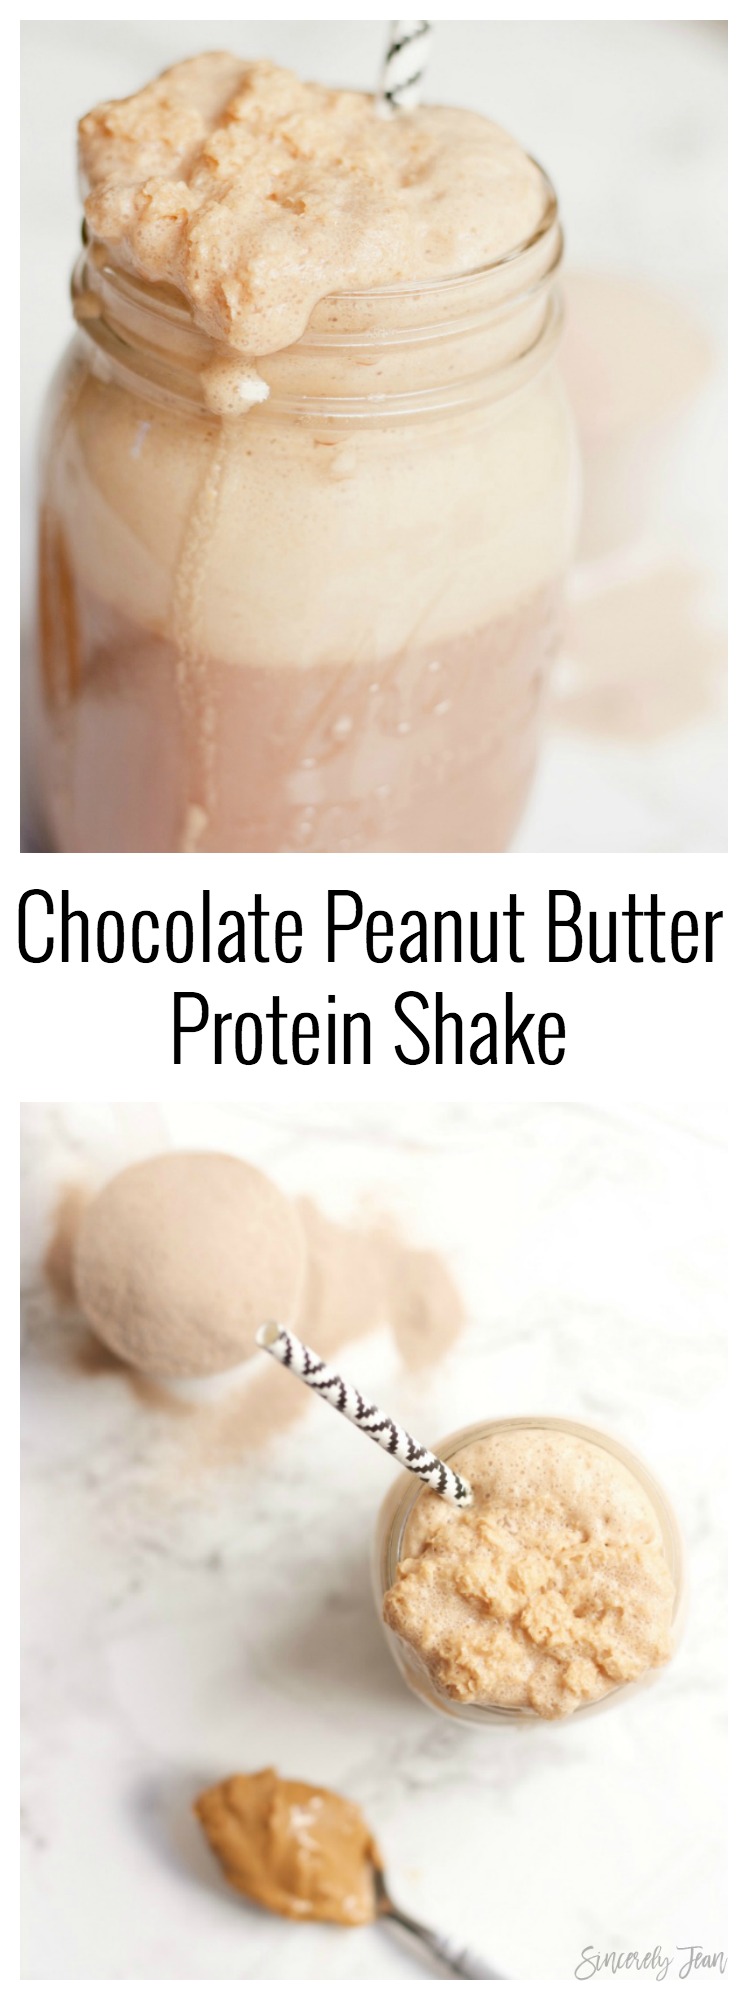 Chocolate Peanut Butter Protein Shake- easy healthy simple chocolate